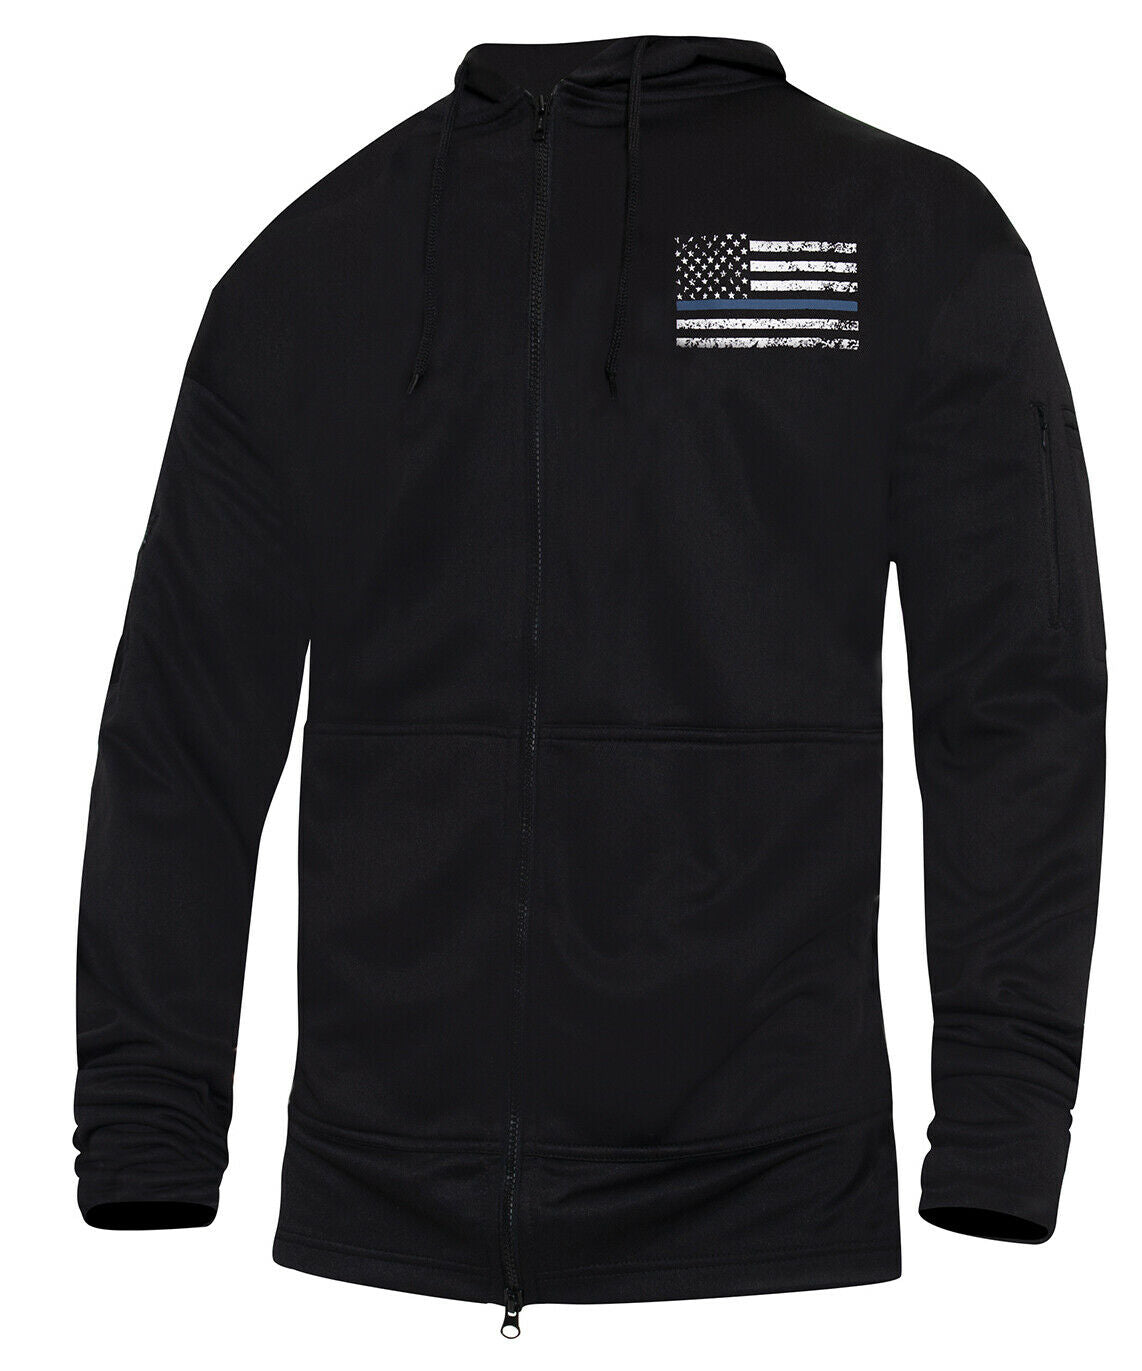 Rothco Thin Blue Line Concealed Carry Zippered Hoodie - Black